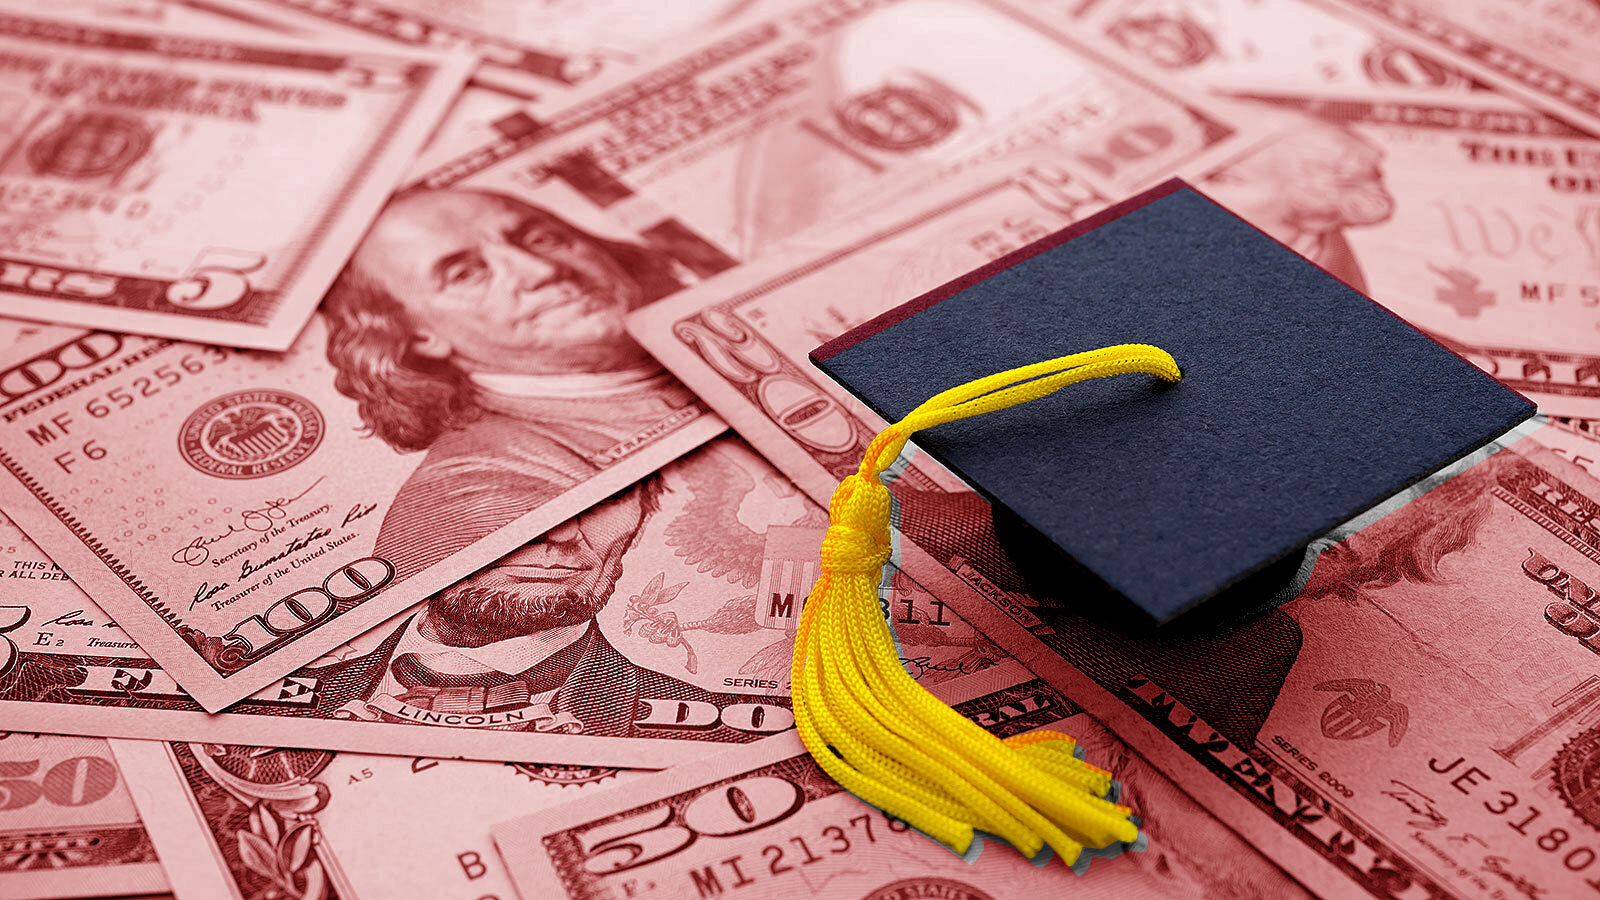   Everything you need to know about the student loan debt crisis  